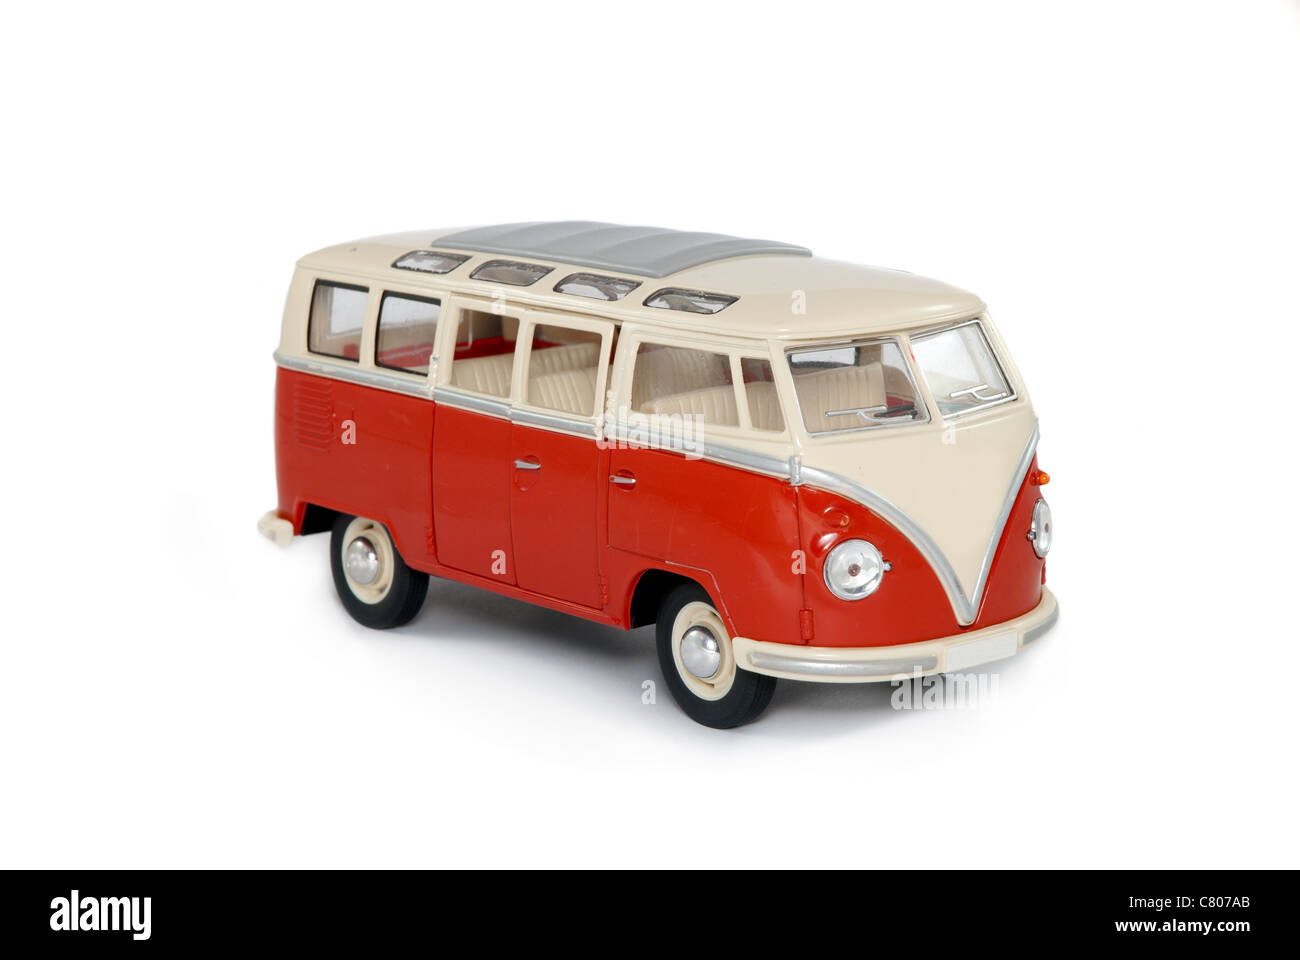 Old red bus Cut Out Stock Images & Pictures - Alamy